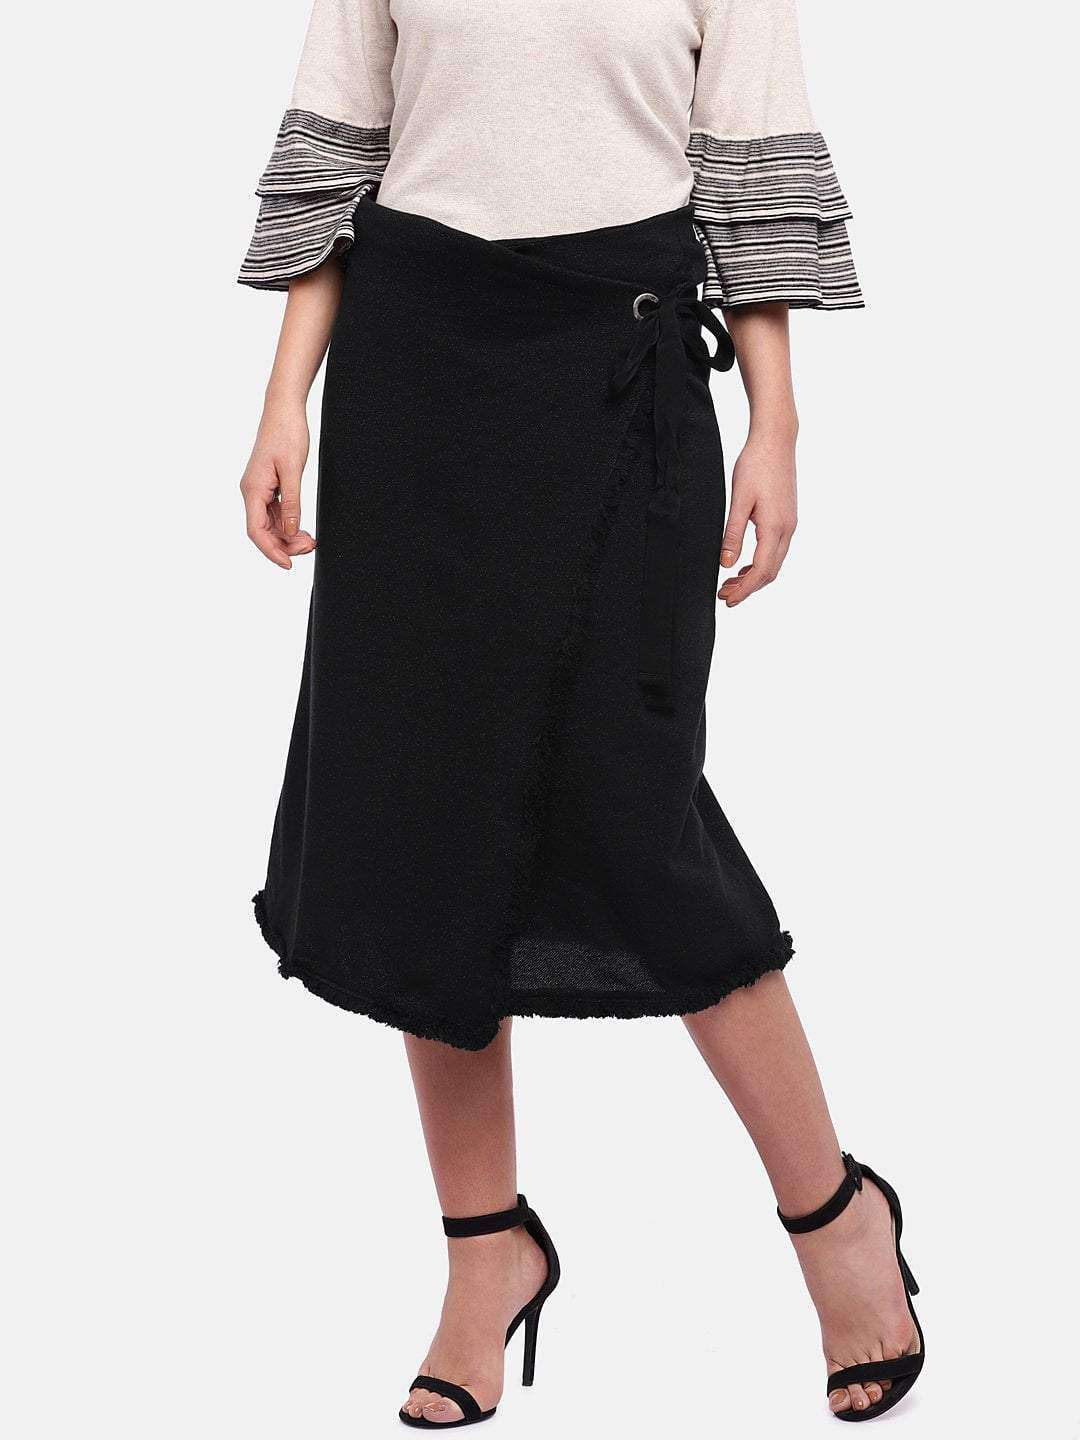 Pants Skirts - Buy Pants Skirts online in India